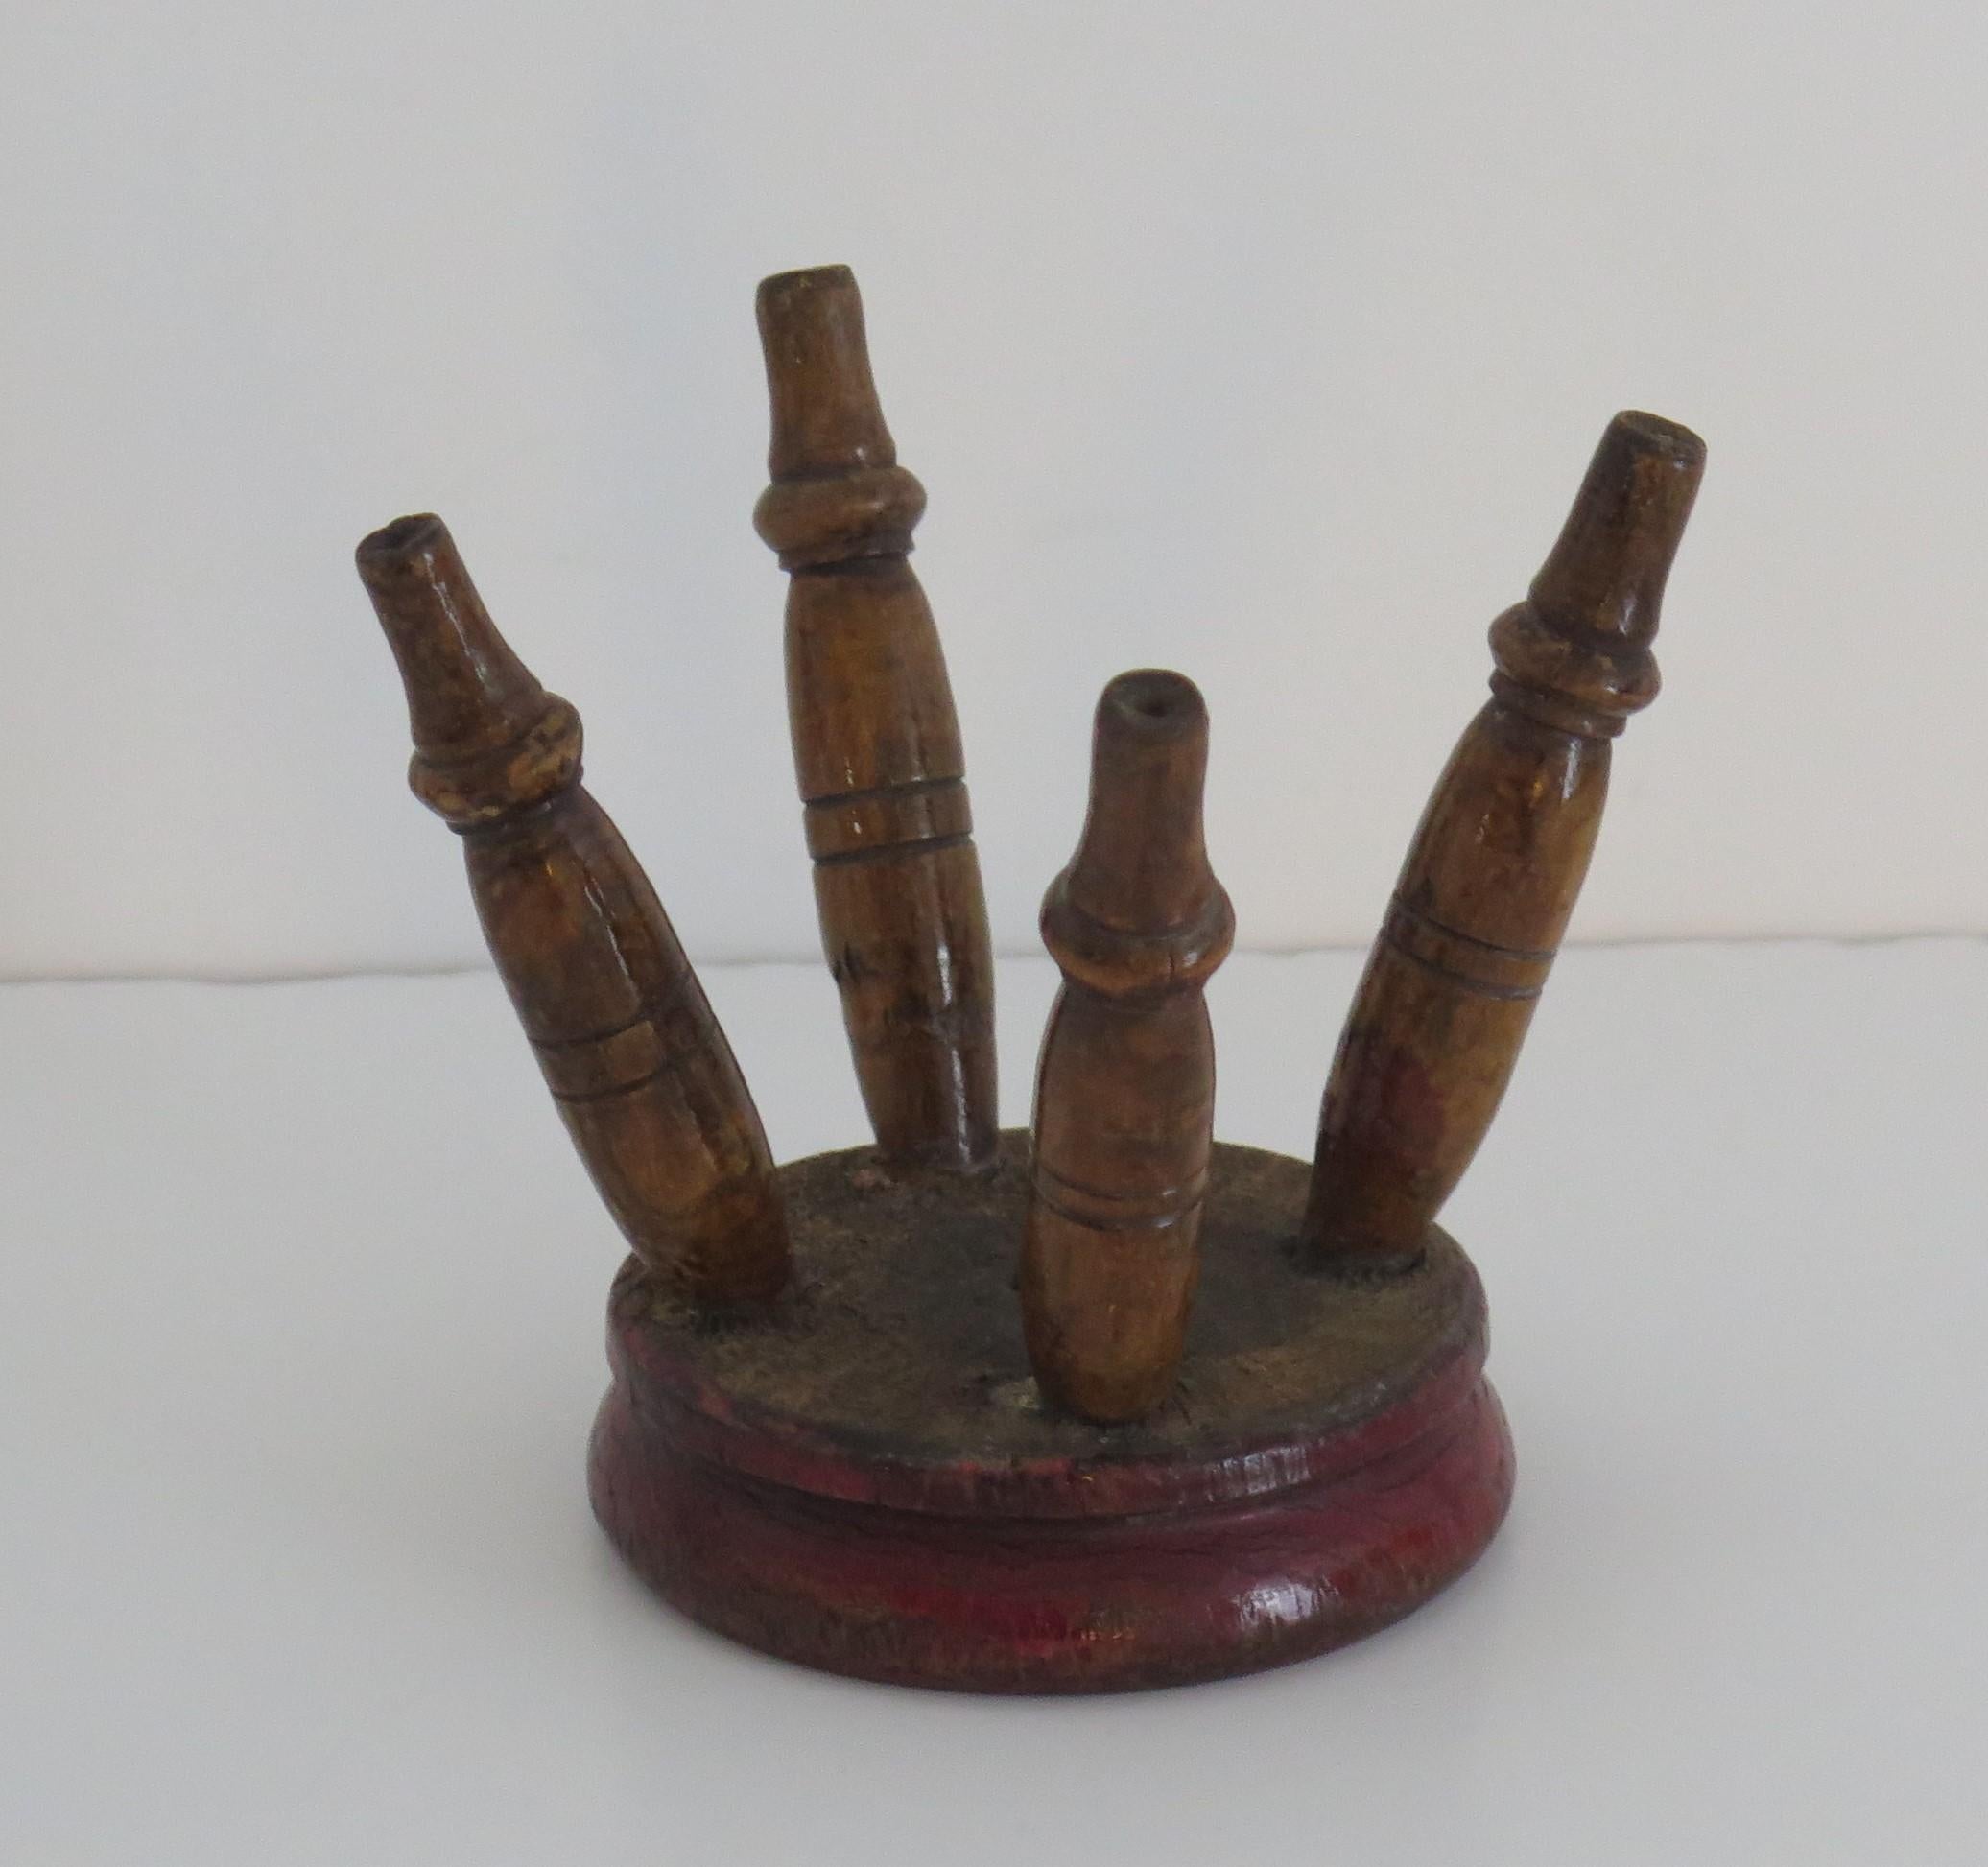 Rare small Candle Stand or Miniature Stool Hand Turned Wood, English circa 1850 For Sale 1